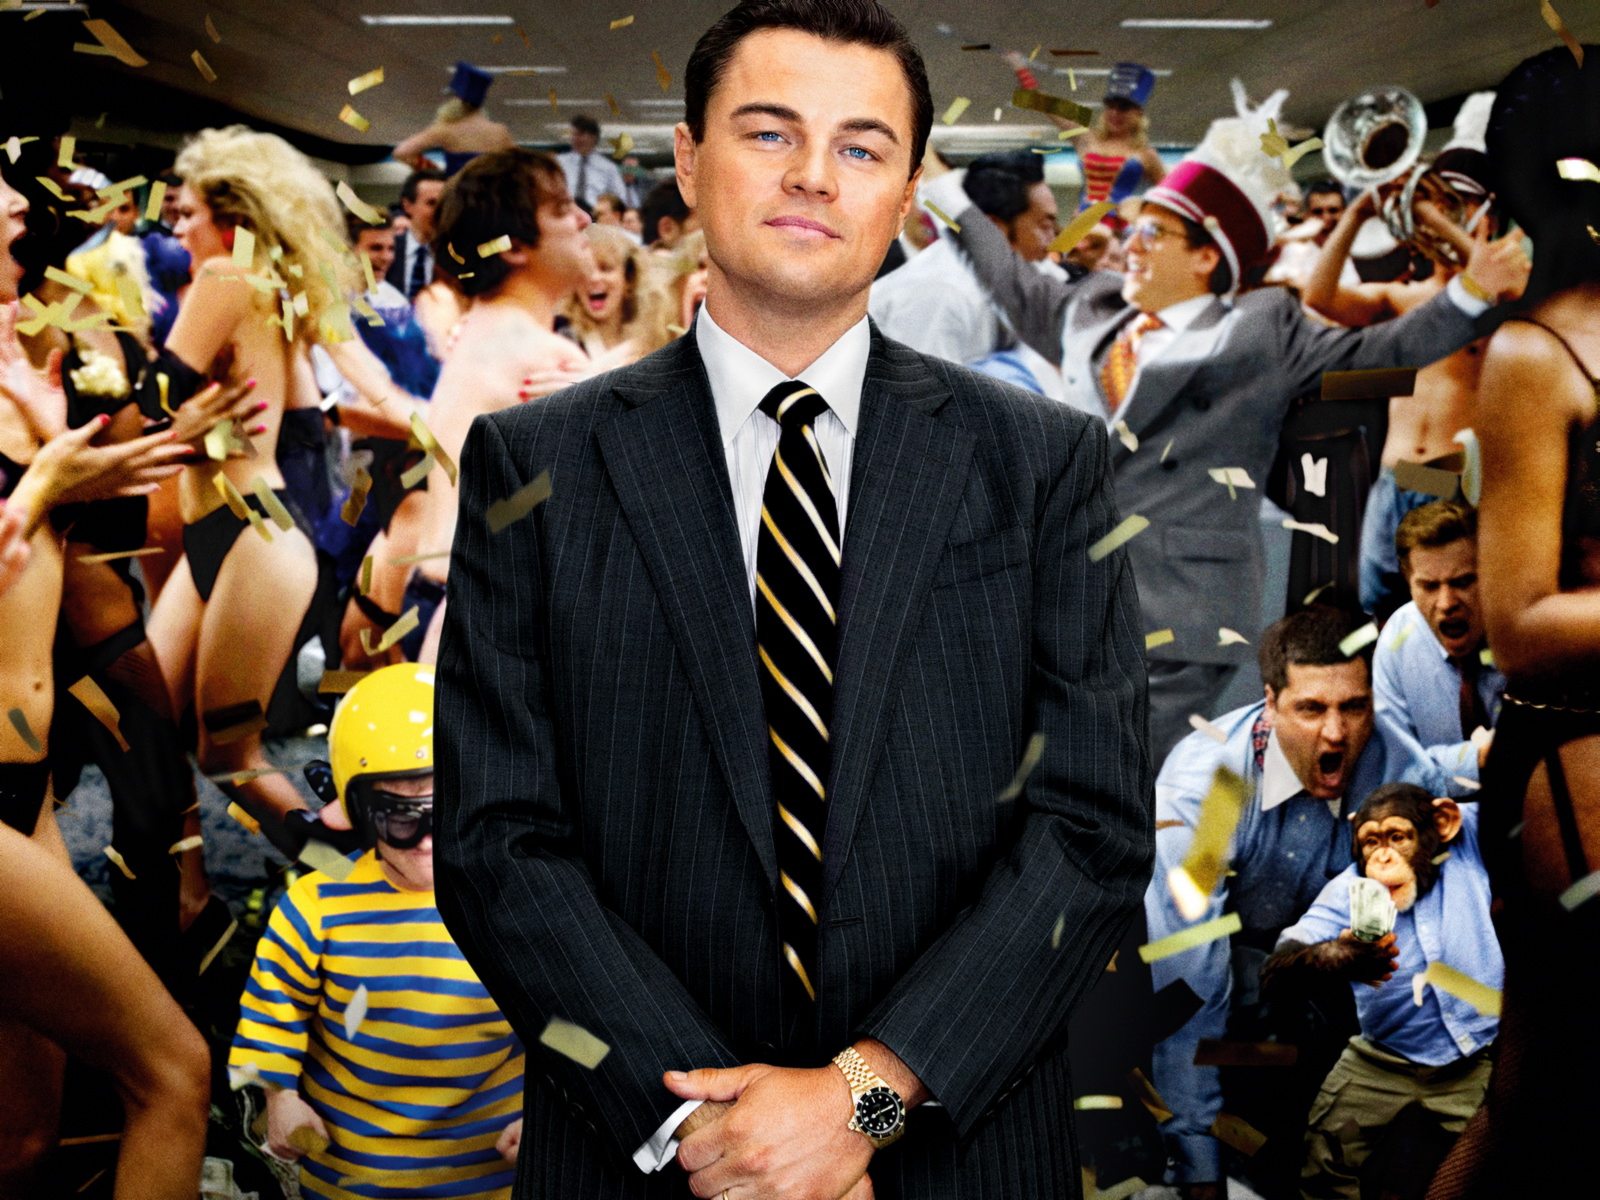 the, Wolf, Of, Wallstreet, Biography, Comedy, Drama Wallpaper